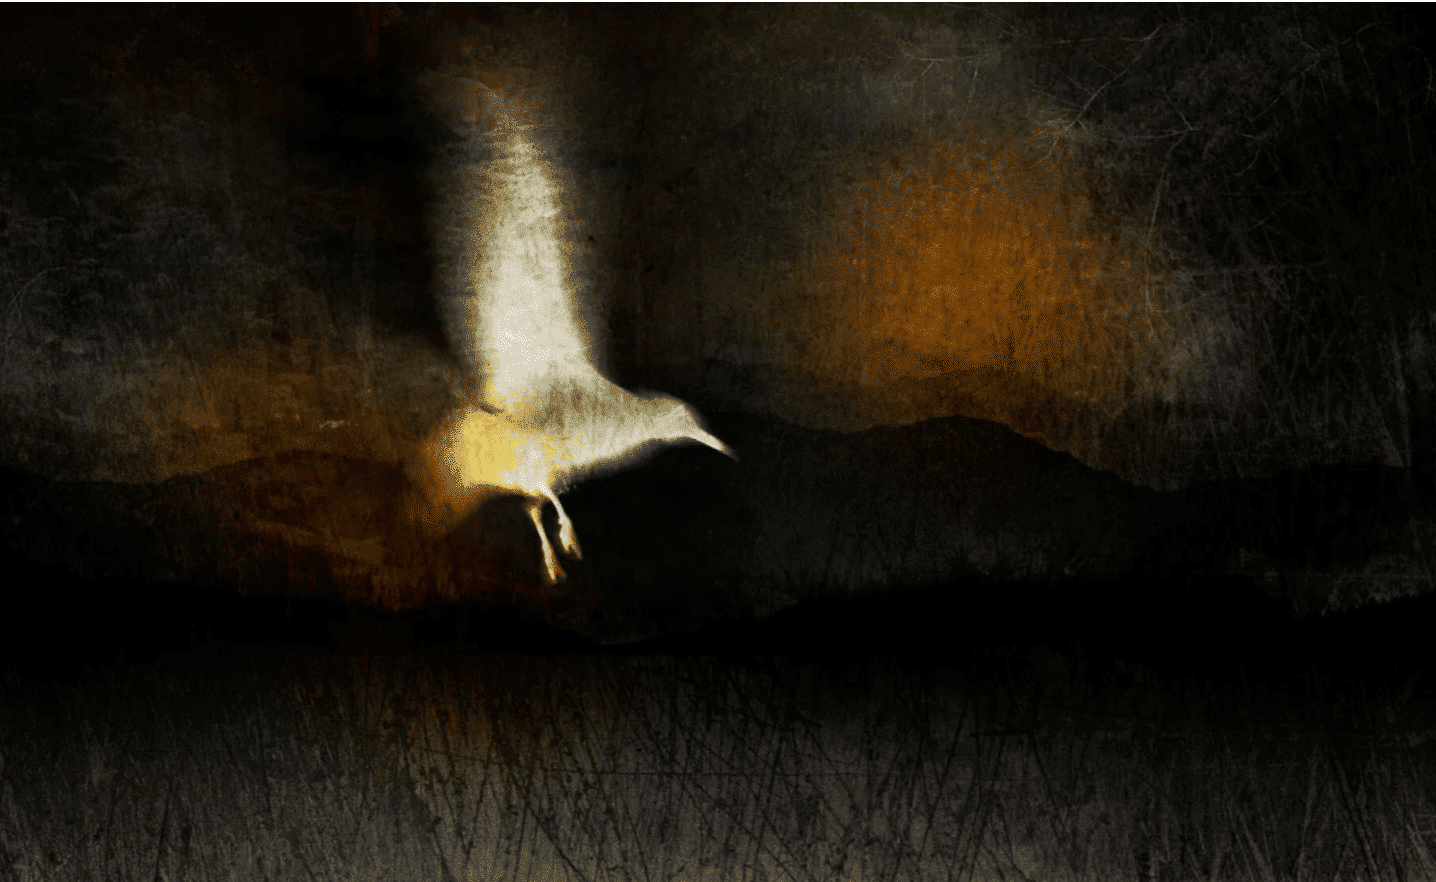 A ghostly image of a white bird against a dark background 